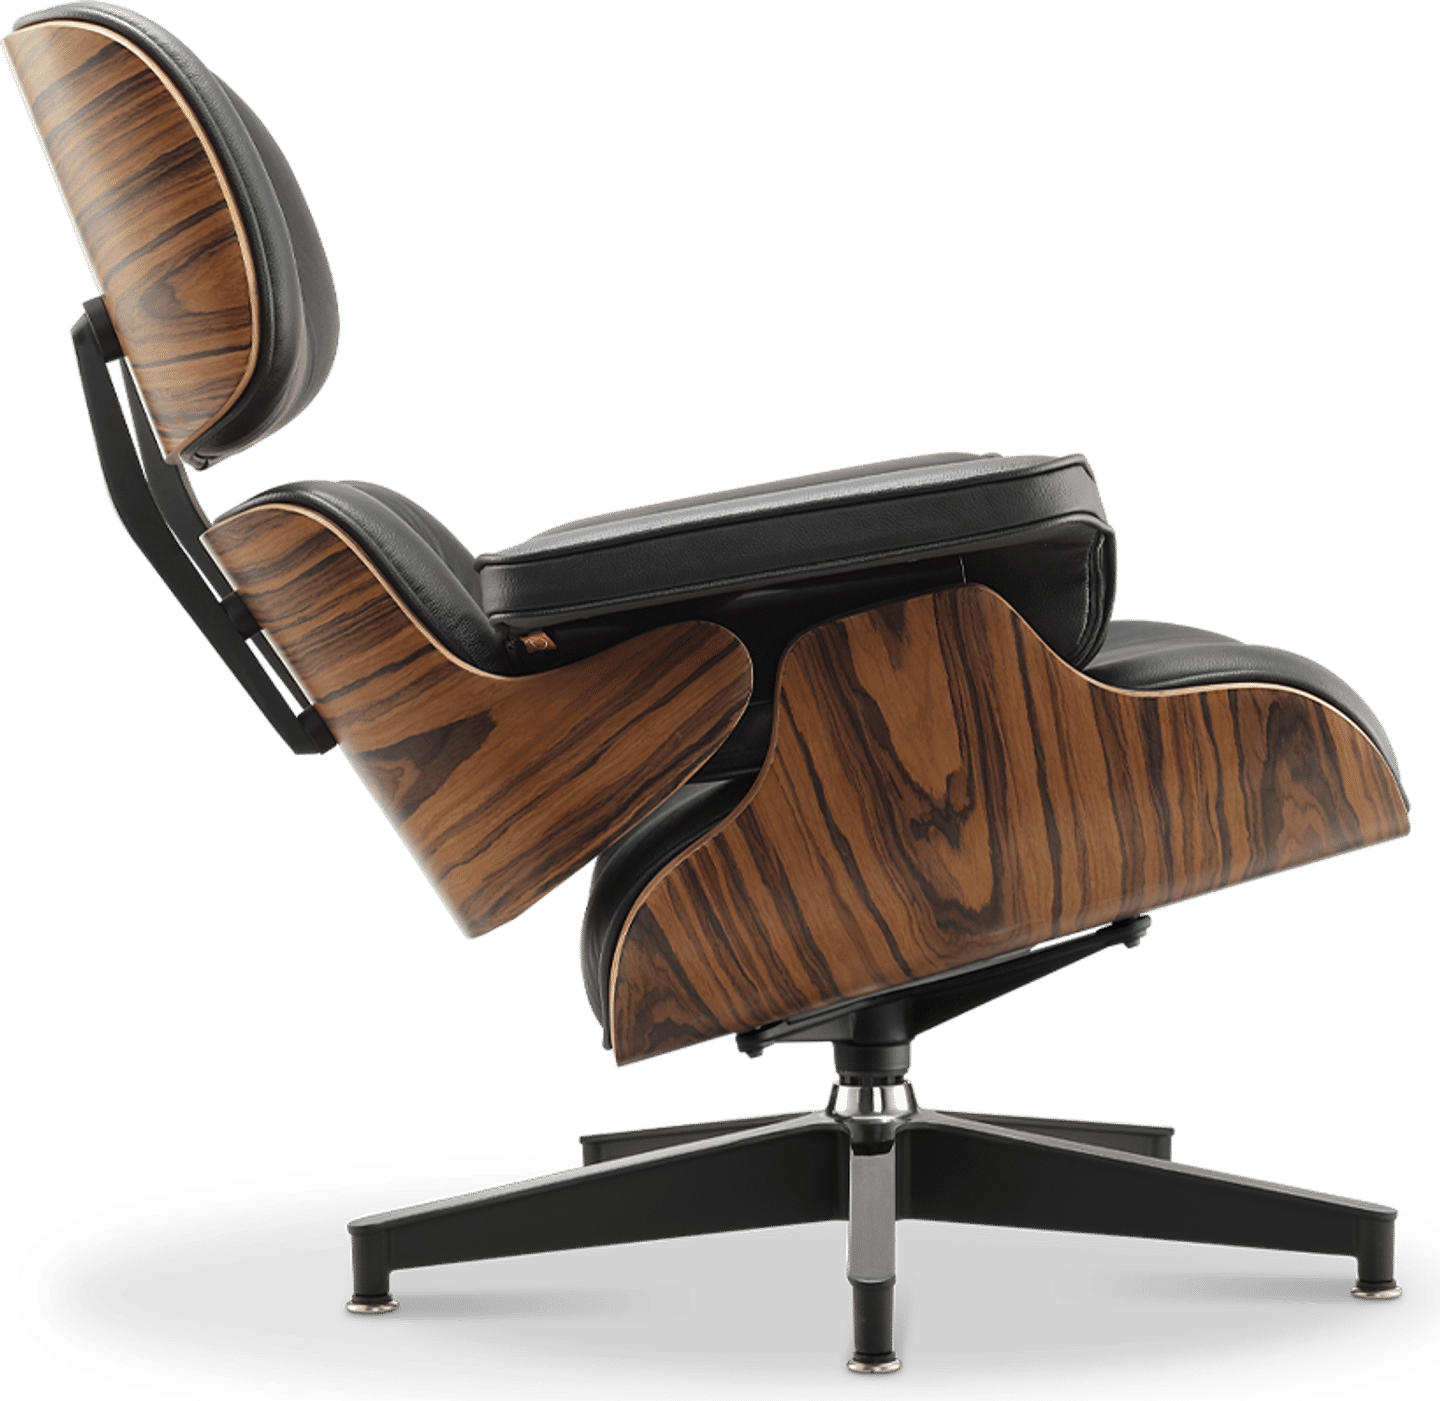 Eames Style Lounge Chair H Miller Version Italian Leather/Black/Rosewood image.